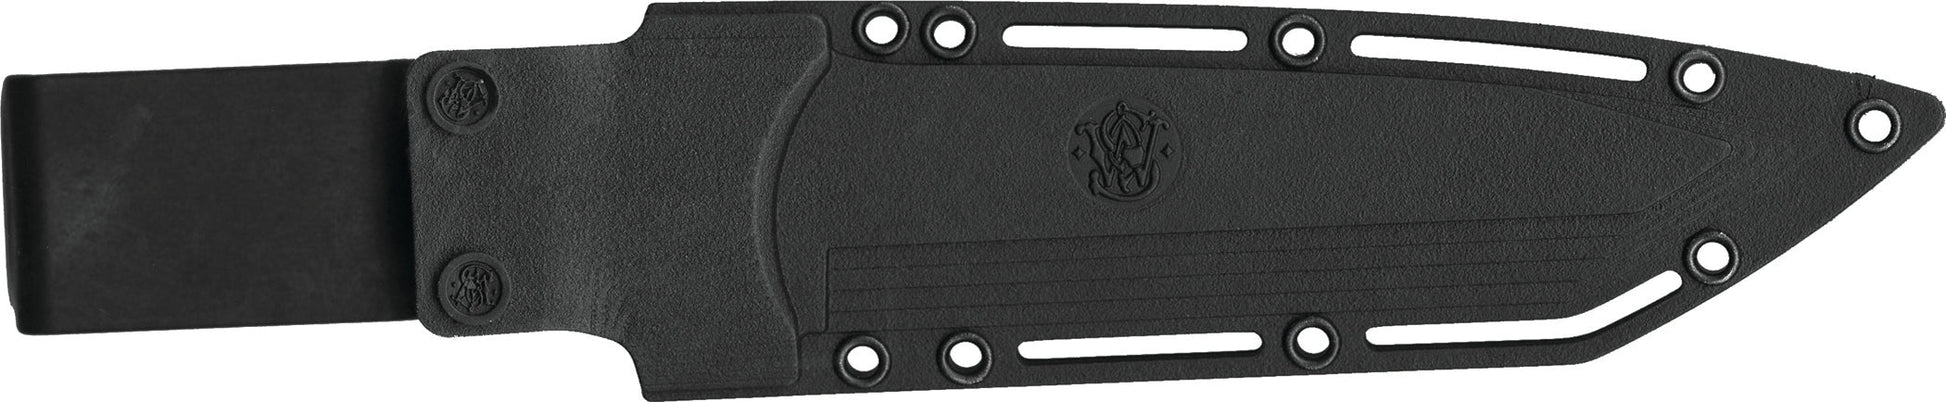 Smith & Wesson Tactical Tanto Fixed Blade Gray